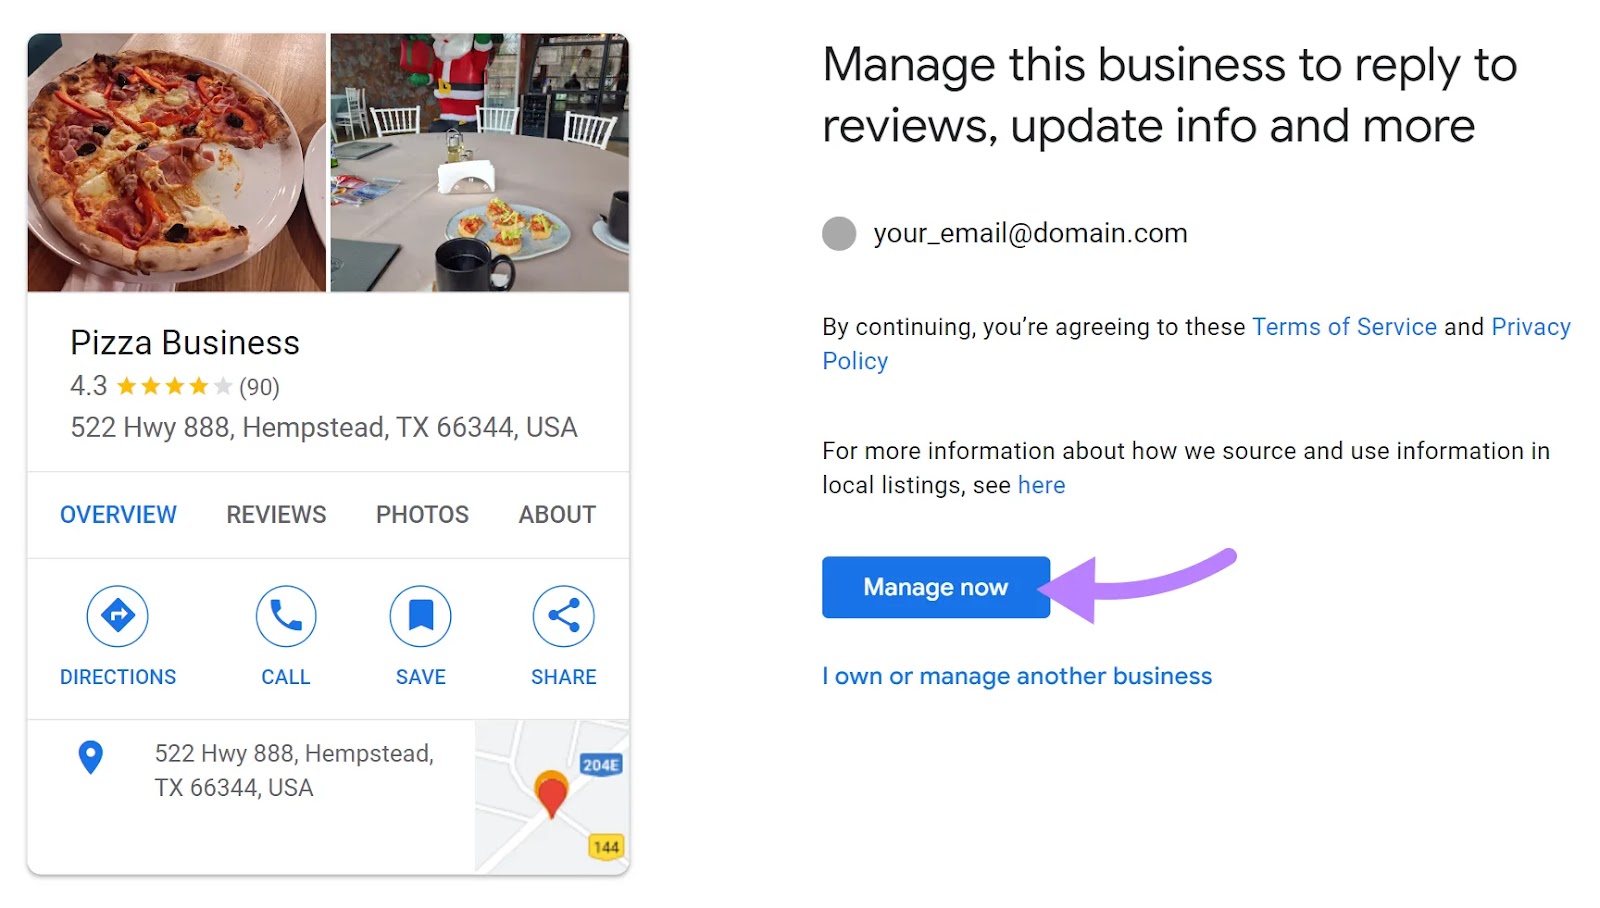 "Manage now" fastener  highlighted adjacent  to the "Pizza Business" successful  GBP page